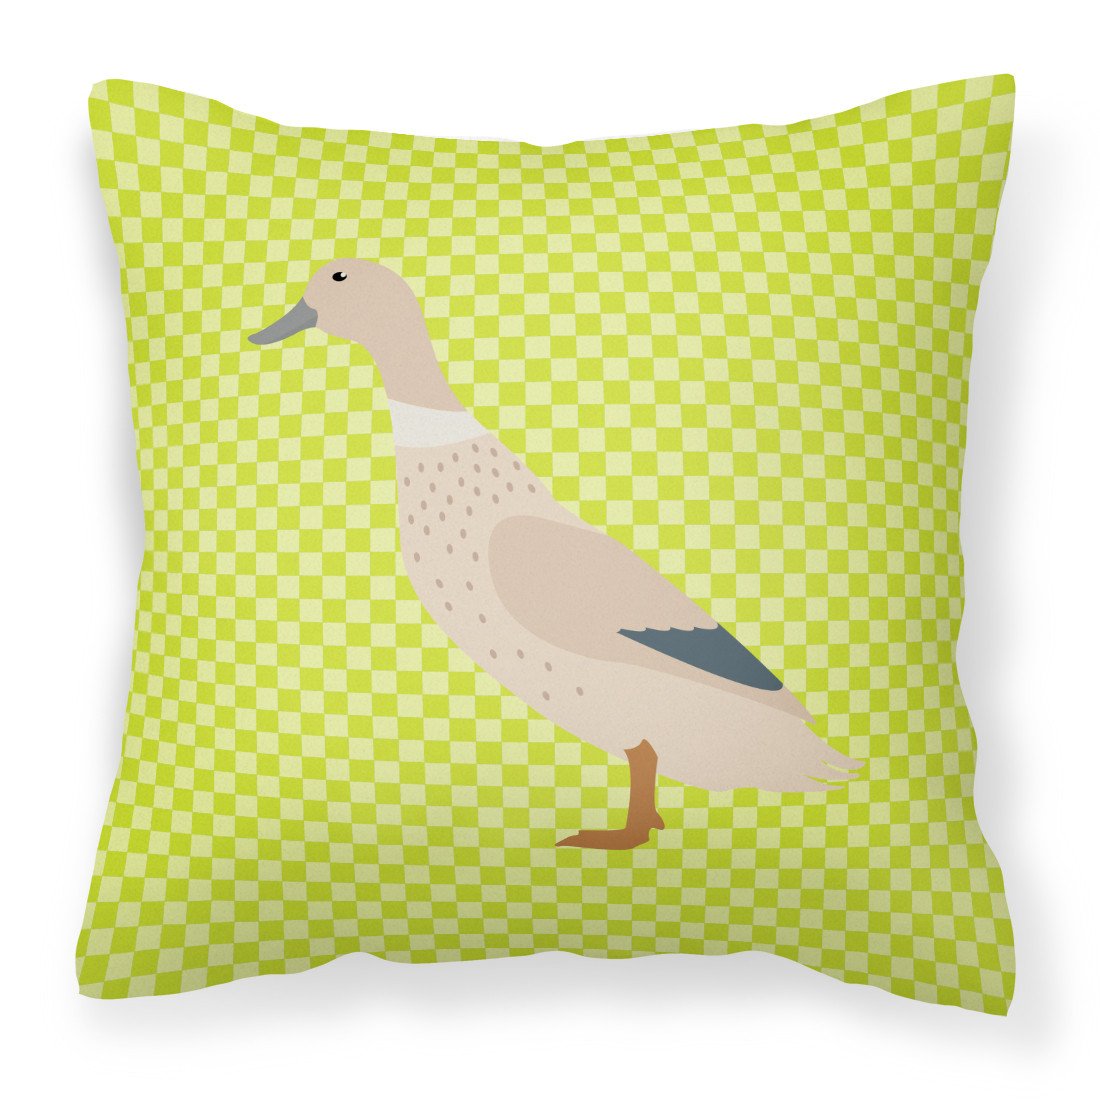 West Harlequin Duck Green Fabric Decorative Pillow BB7684PW1818 by Caroline's Treasures